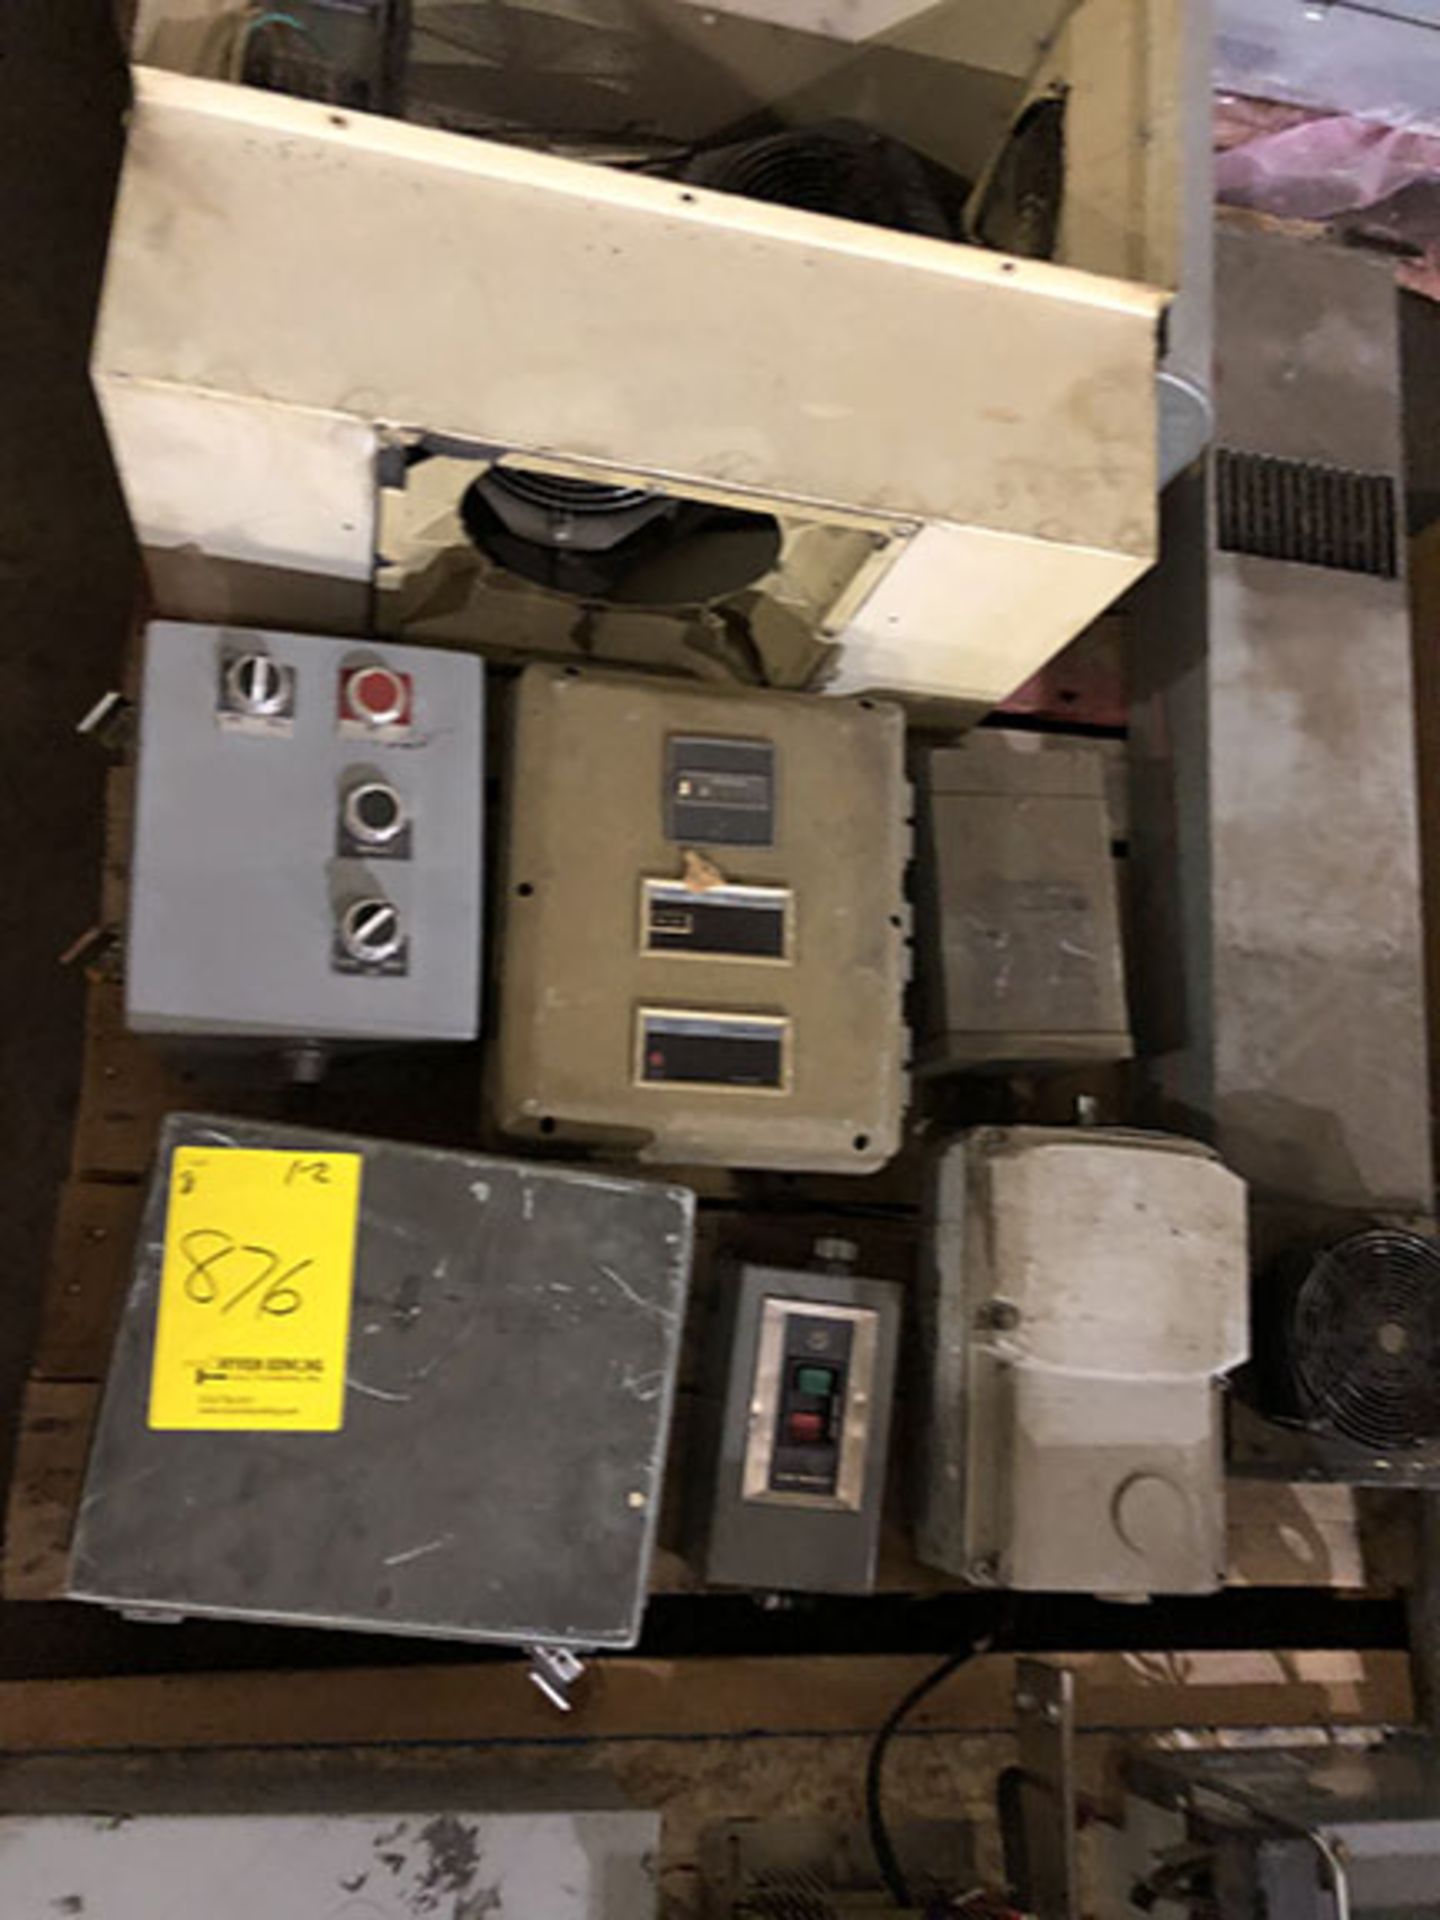 (2) SKIDS OF ASSORTED ELECTRICAL BREAKER BOXES AND CONTROL PANELS